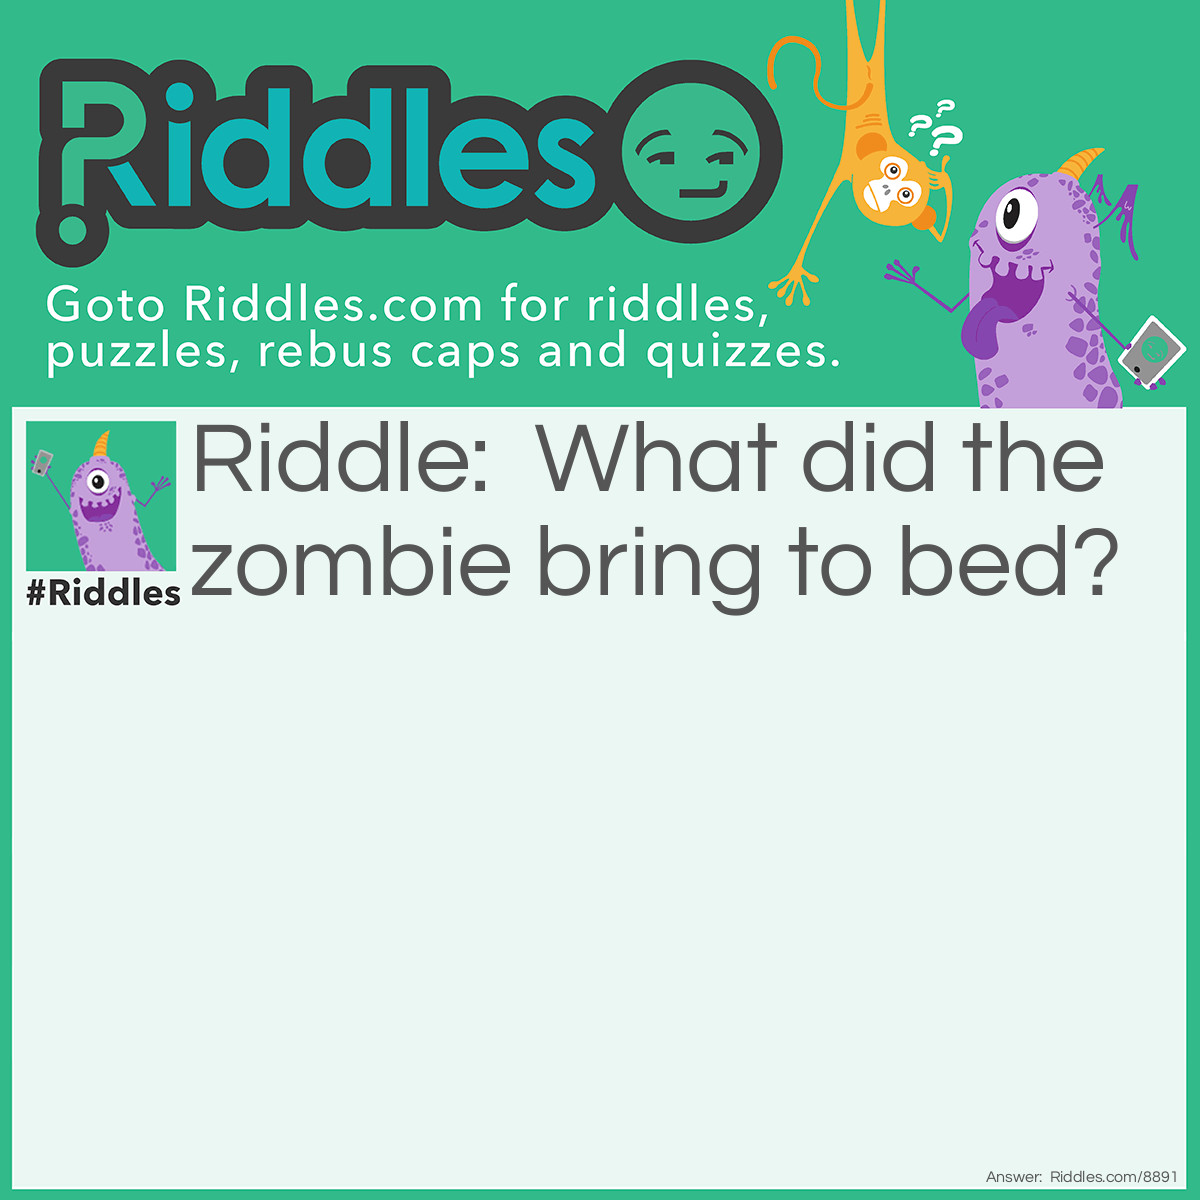 Riddle: What did the zombie bring to bed? Answer: A deaddy bear.